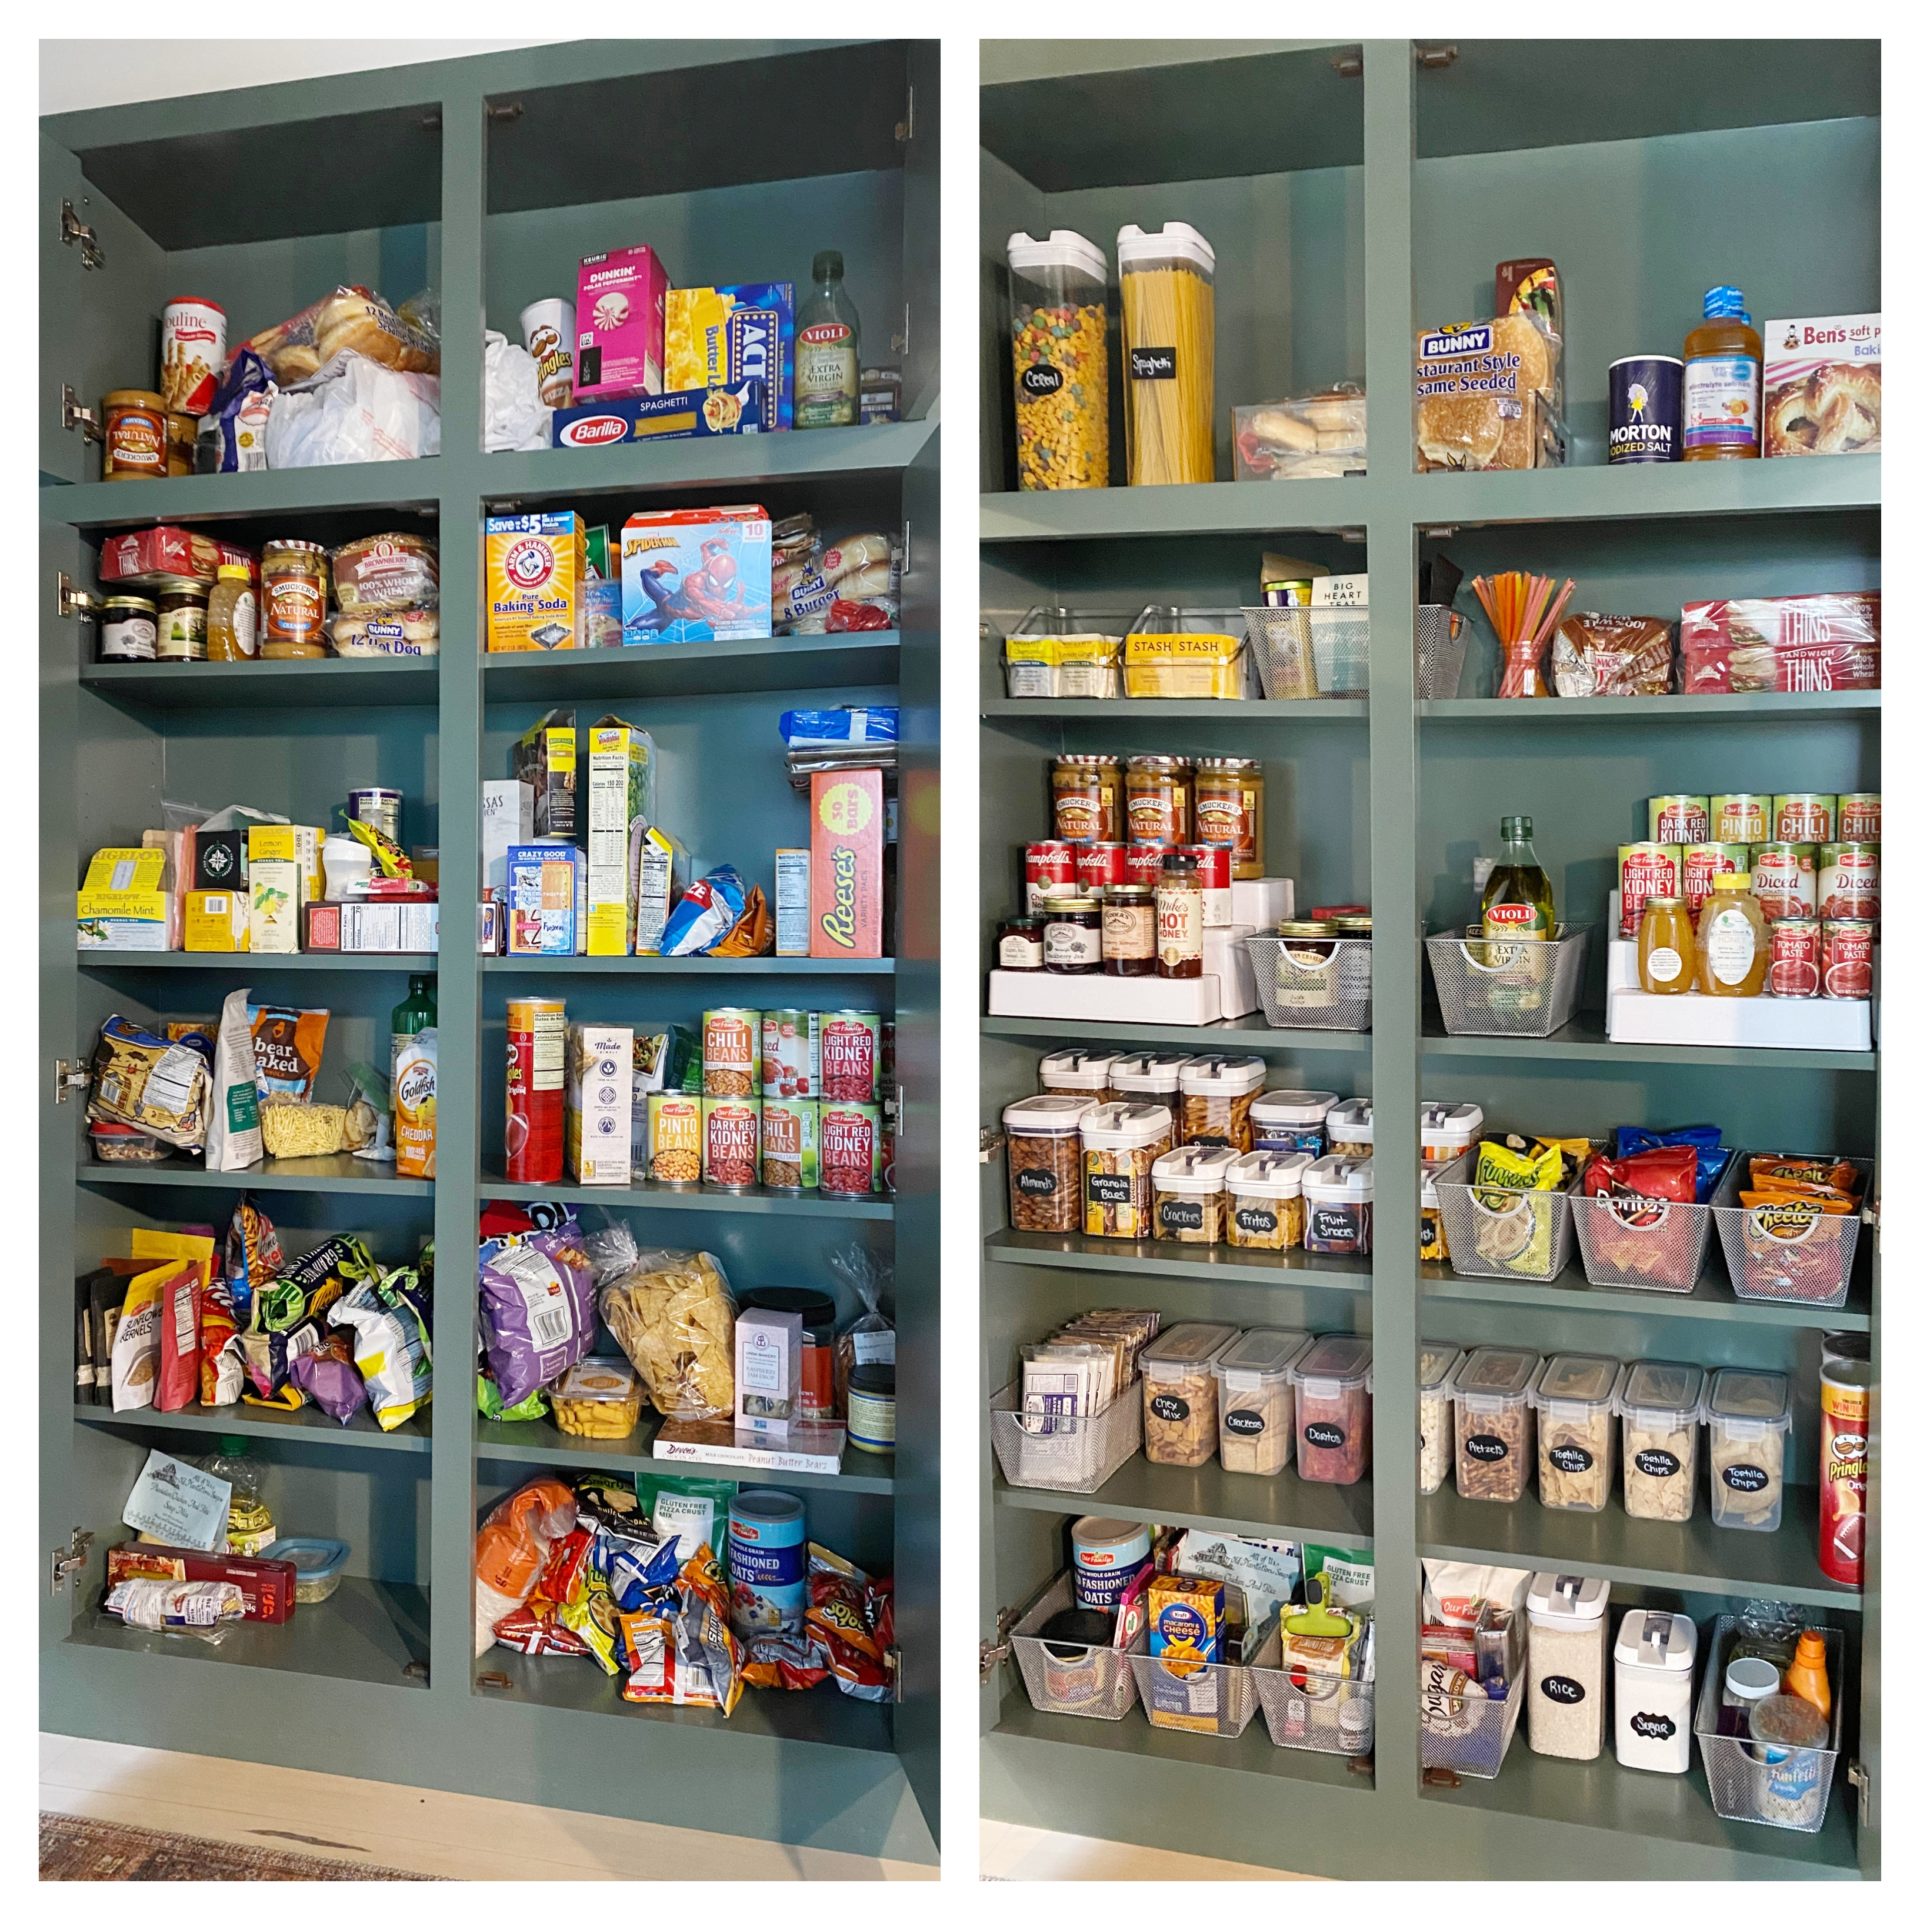 https://livinginyellow.com/wp-content/uploads/2021/01/before-_-after-pantry-scaled.jpg